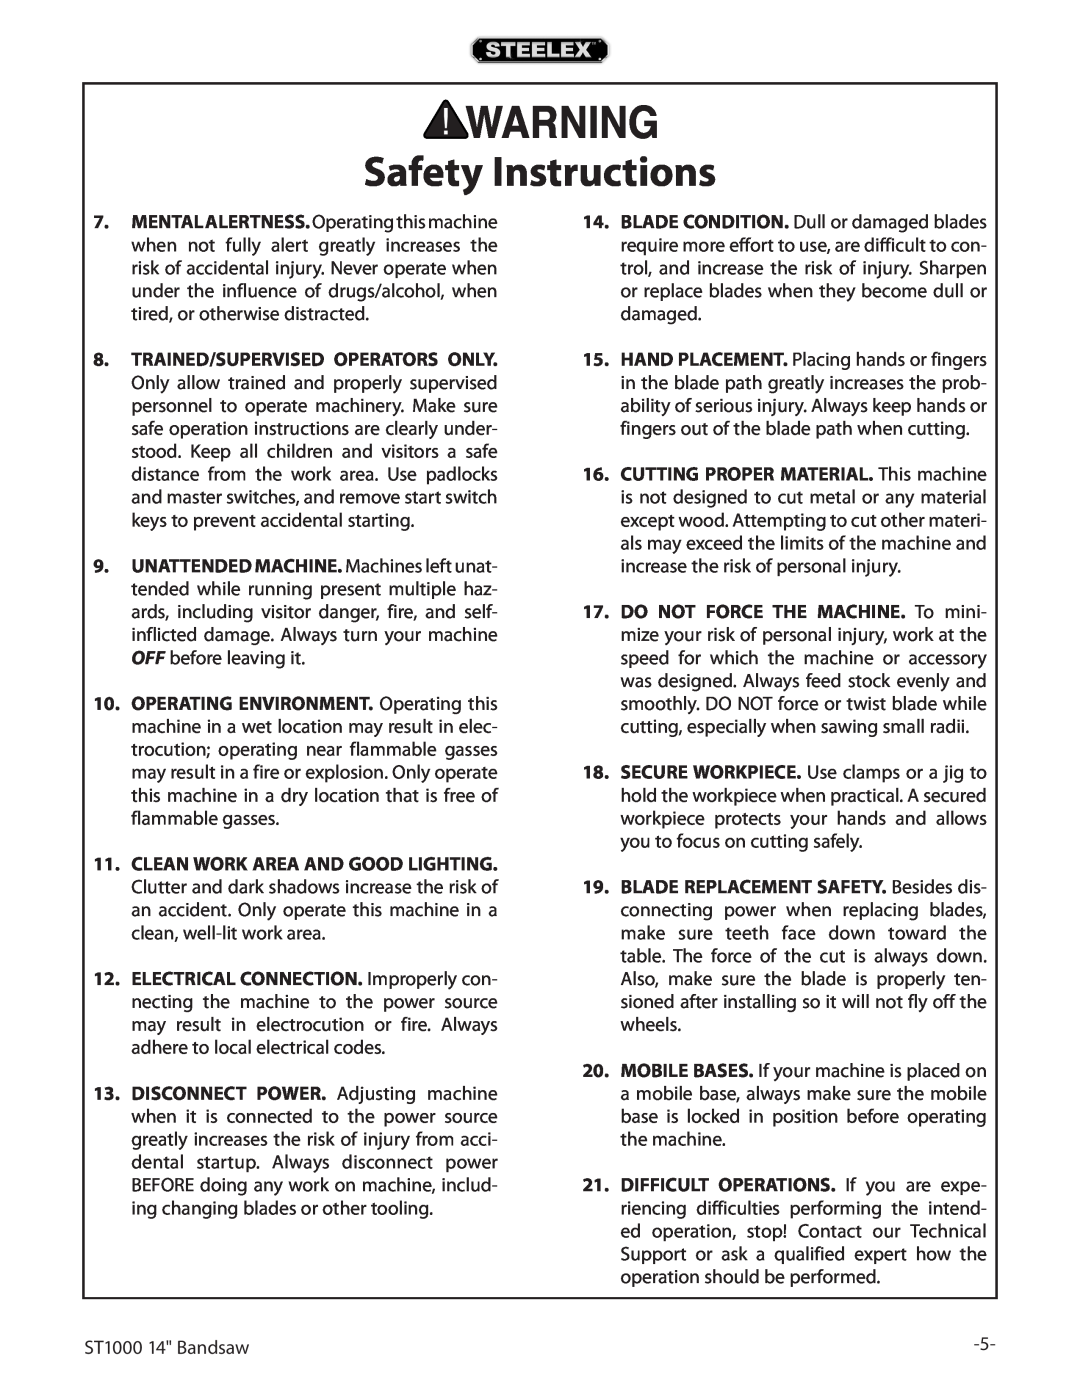 Woodstock ST1000 owner manual Safety Instructions 